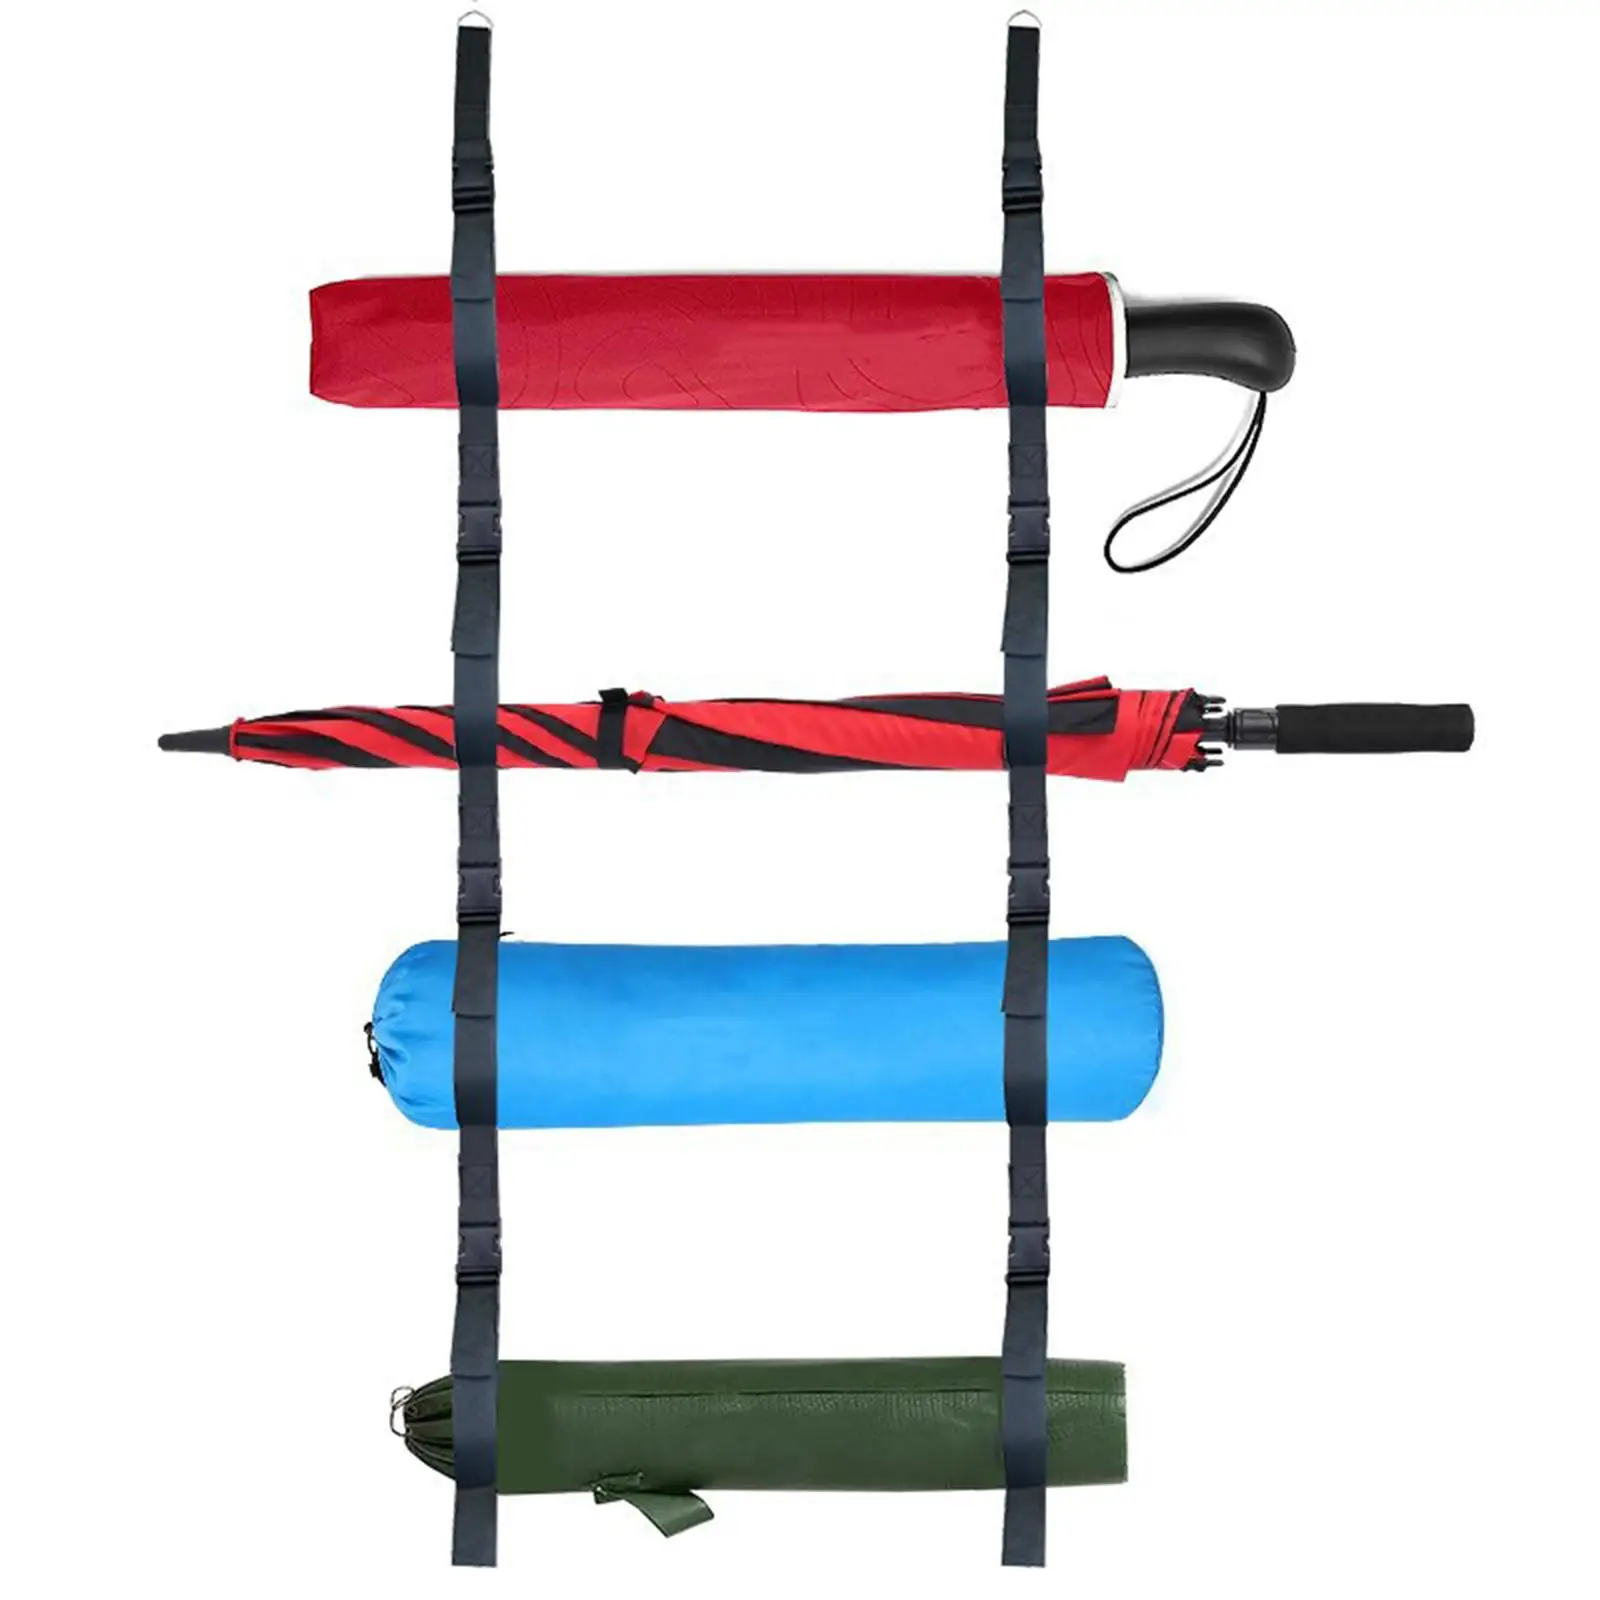 Garage Camping Chair Wall Storage Reusable Adjustable Multipurpose Strong Heavy Duty Wall Storage Straps Organizer Wall Mounted